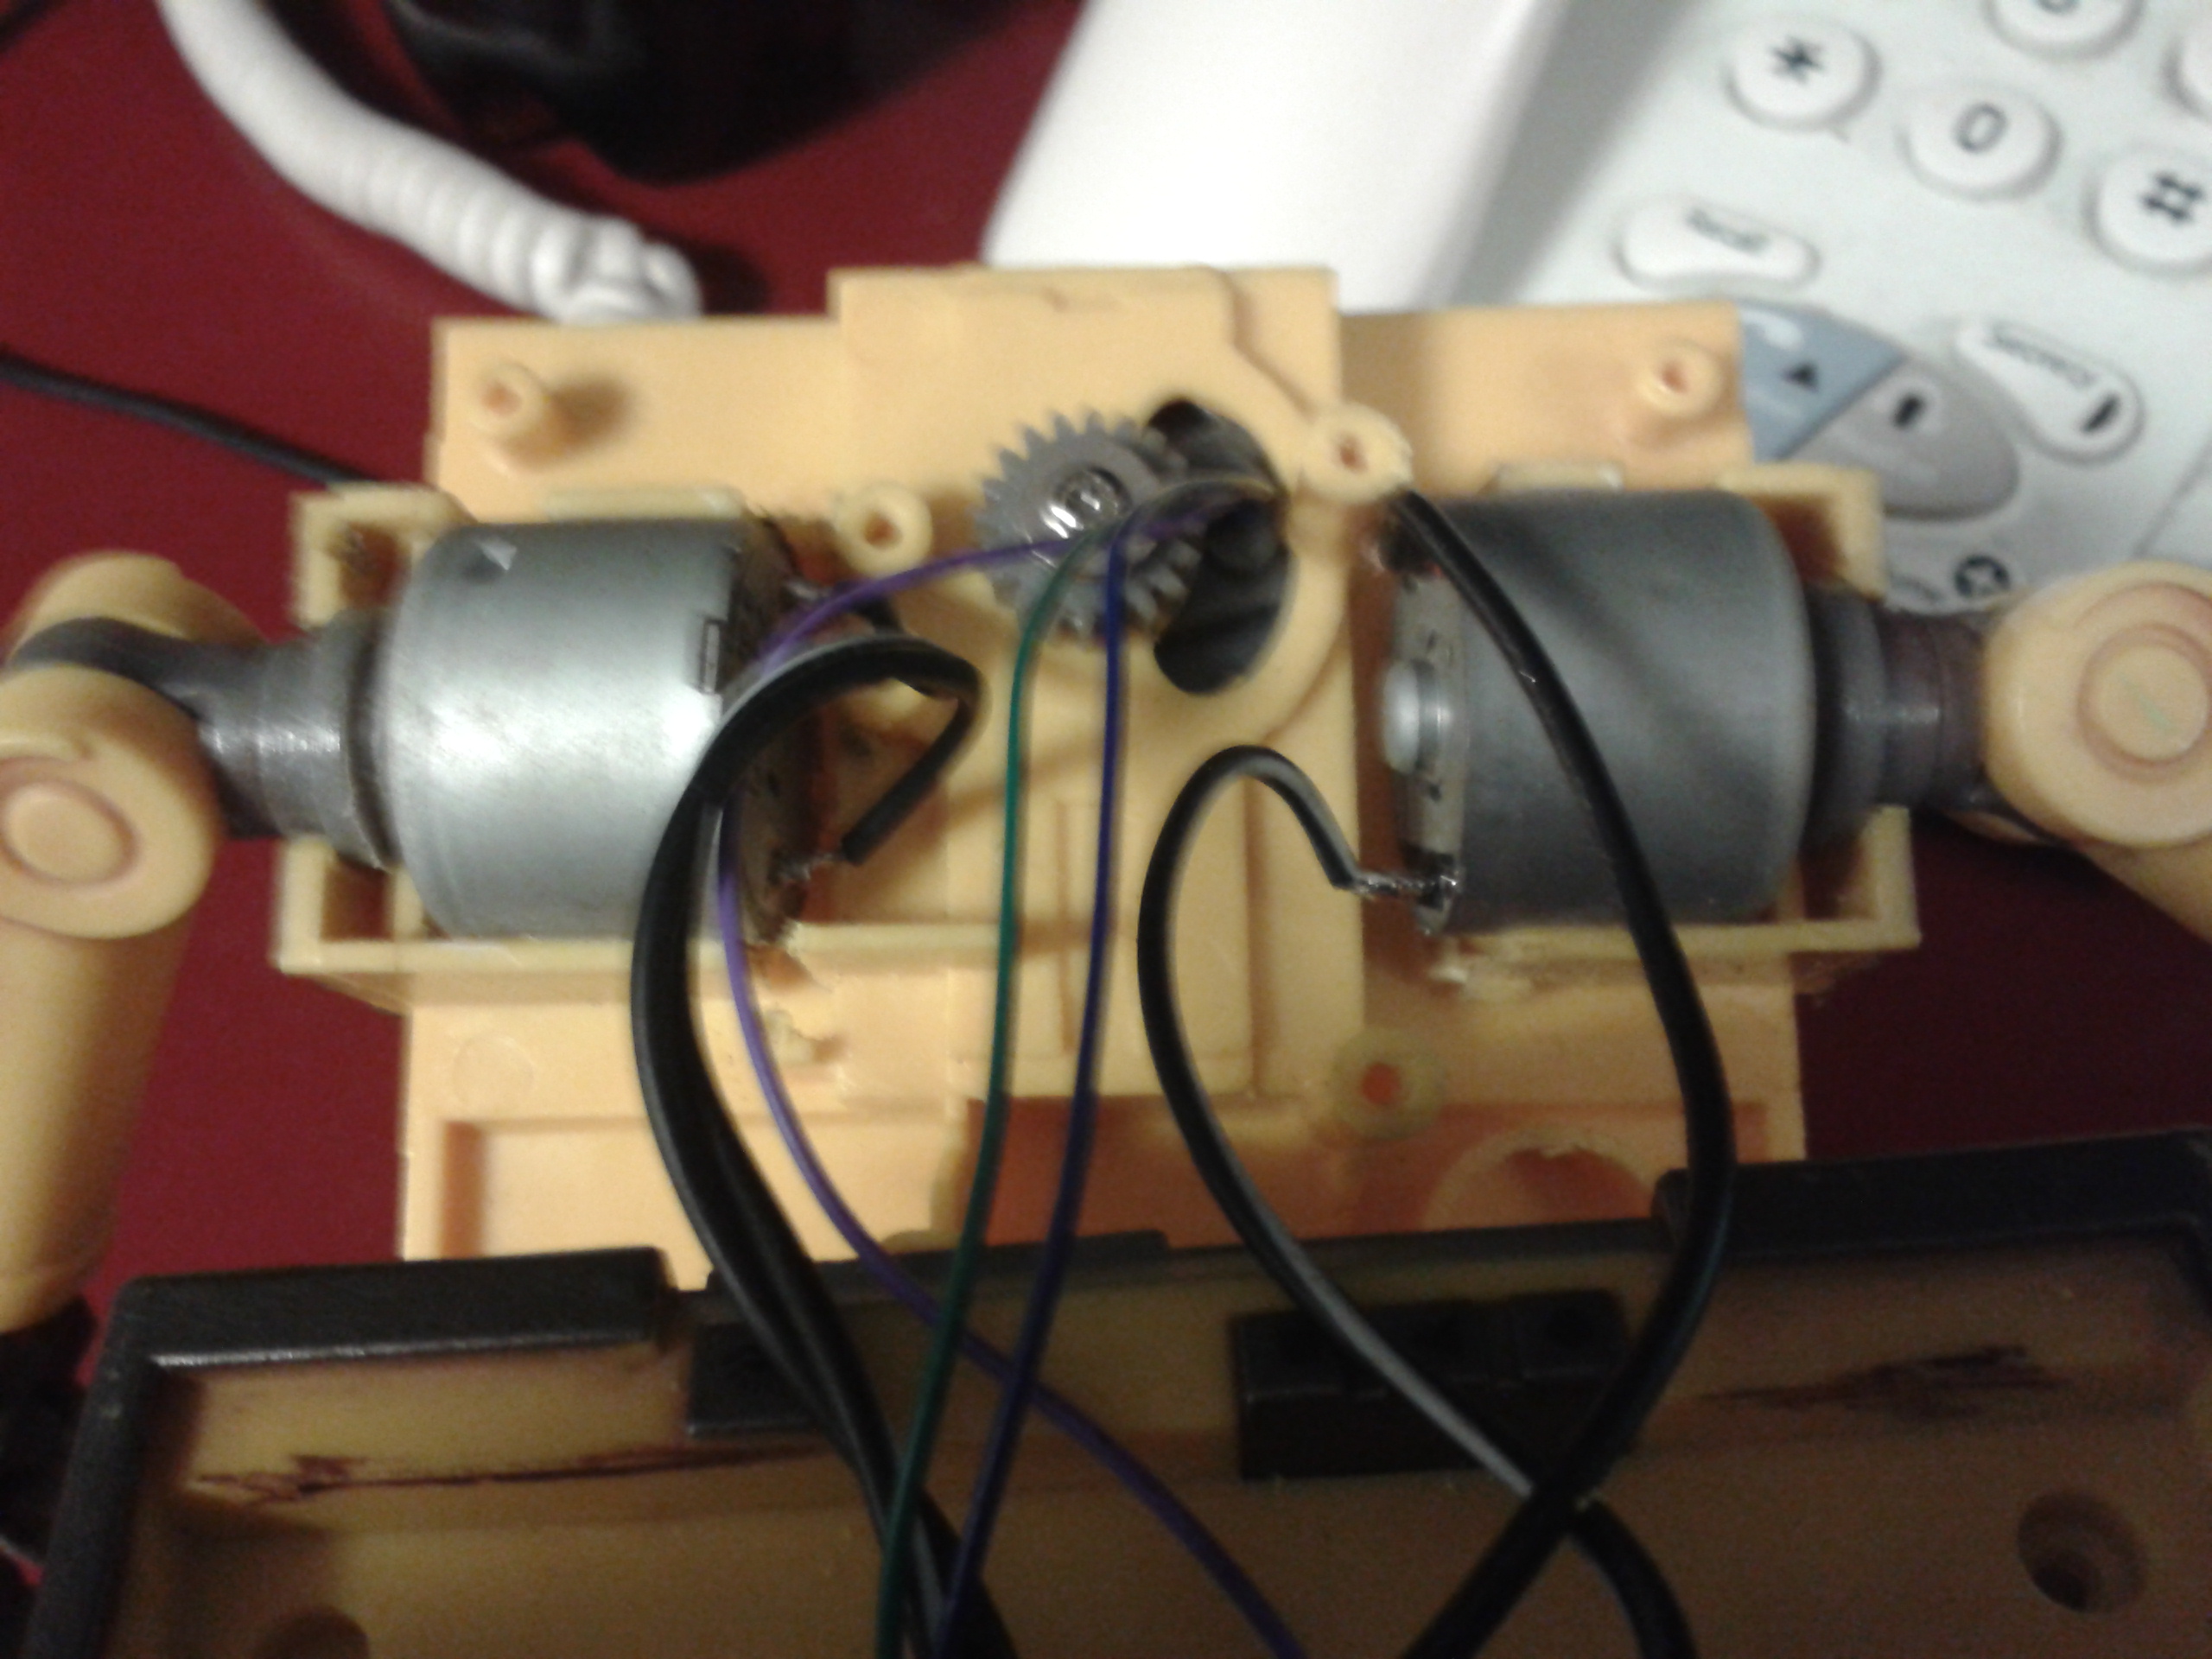 Arm motors fitted, however not attached to arms just yet...